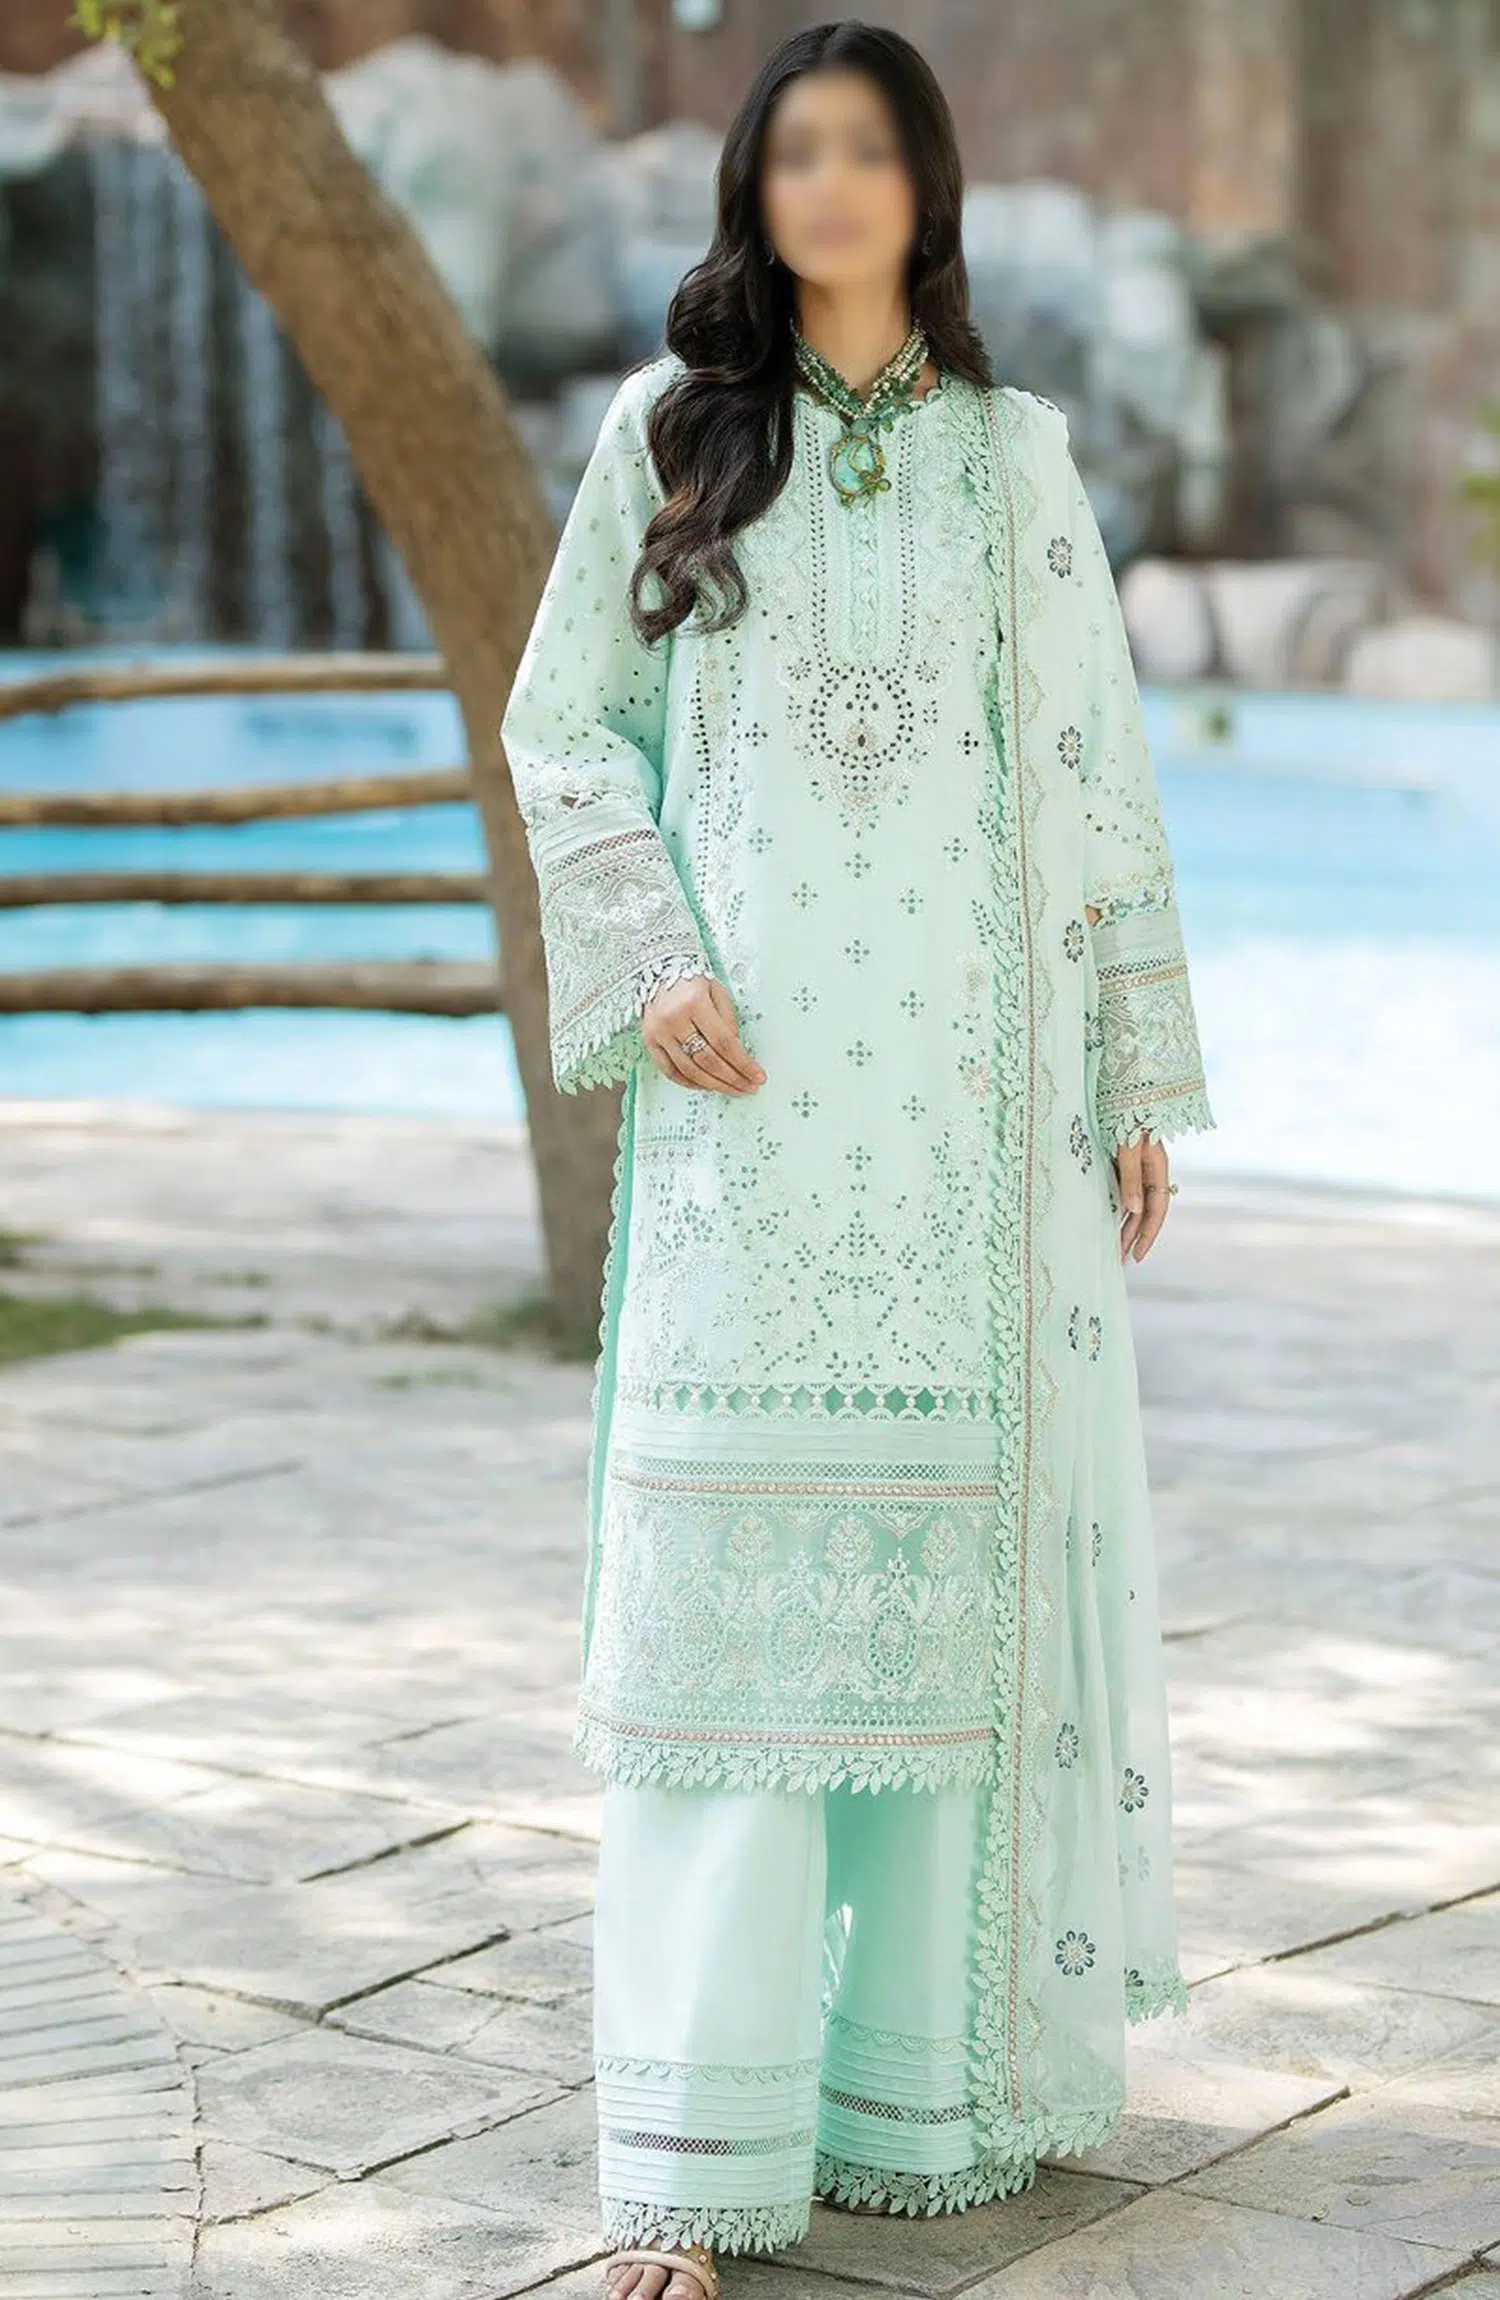 Subah-e-Roshan Luxury Lawn Collection by Serene - SL 65 AARZOO